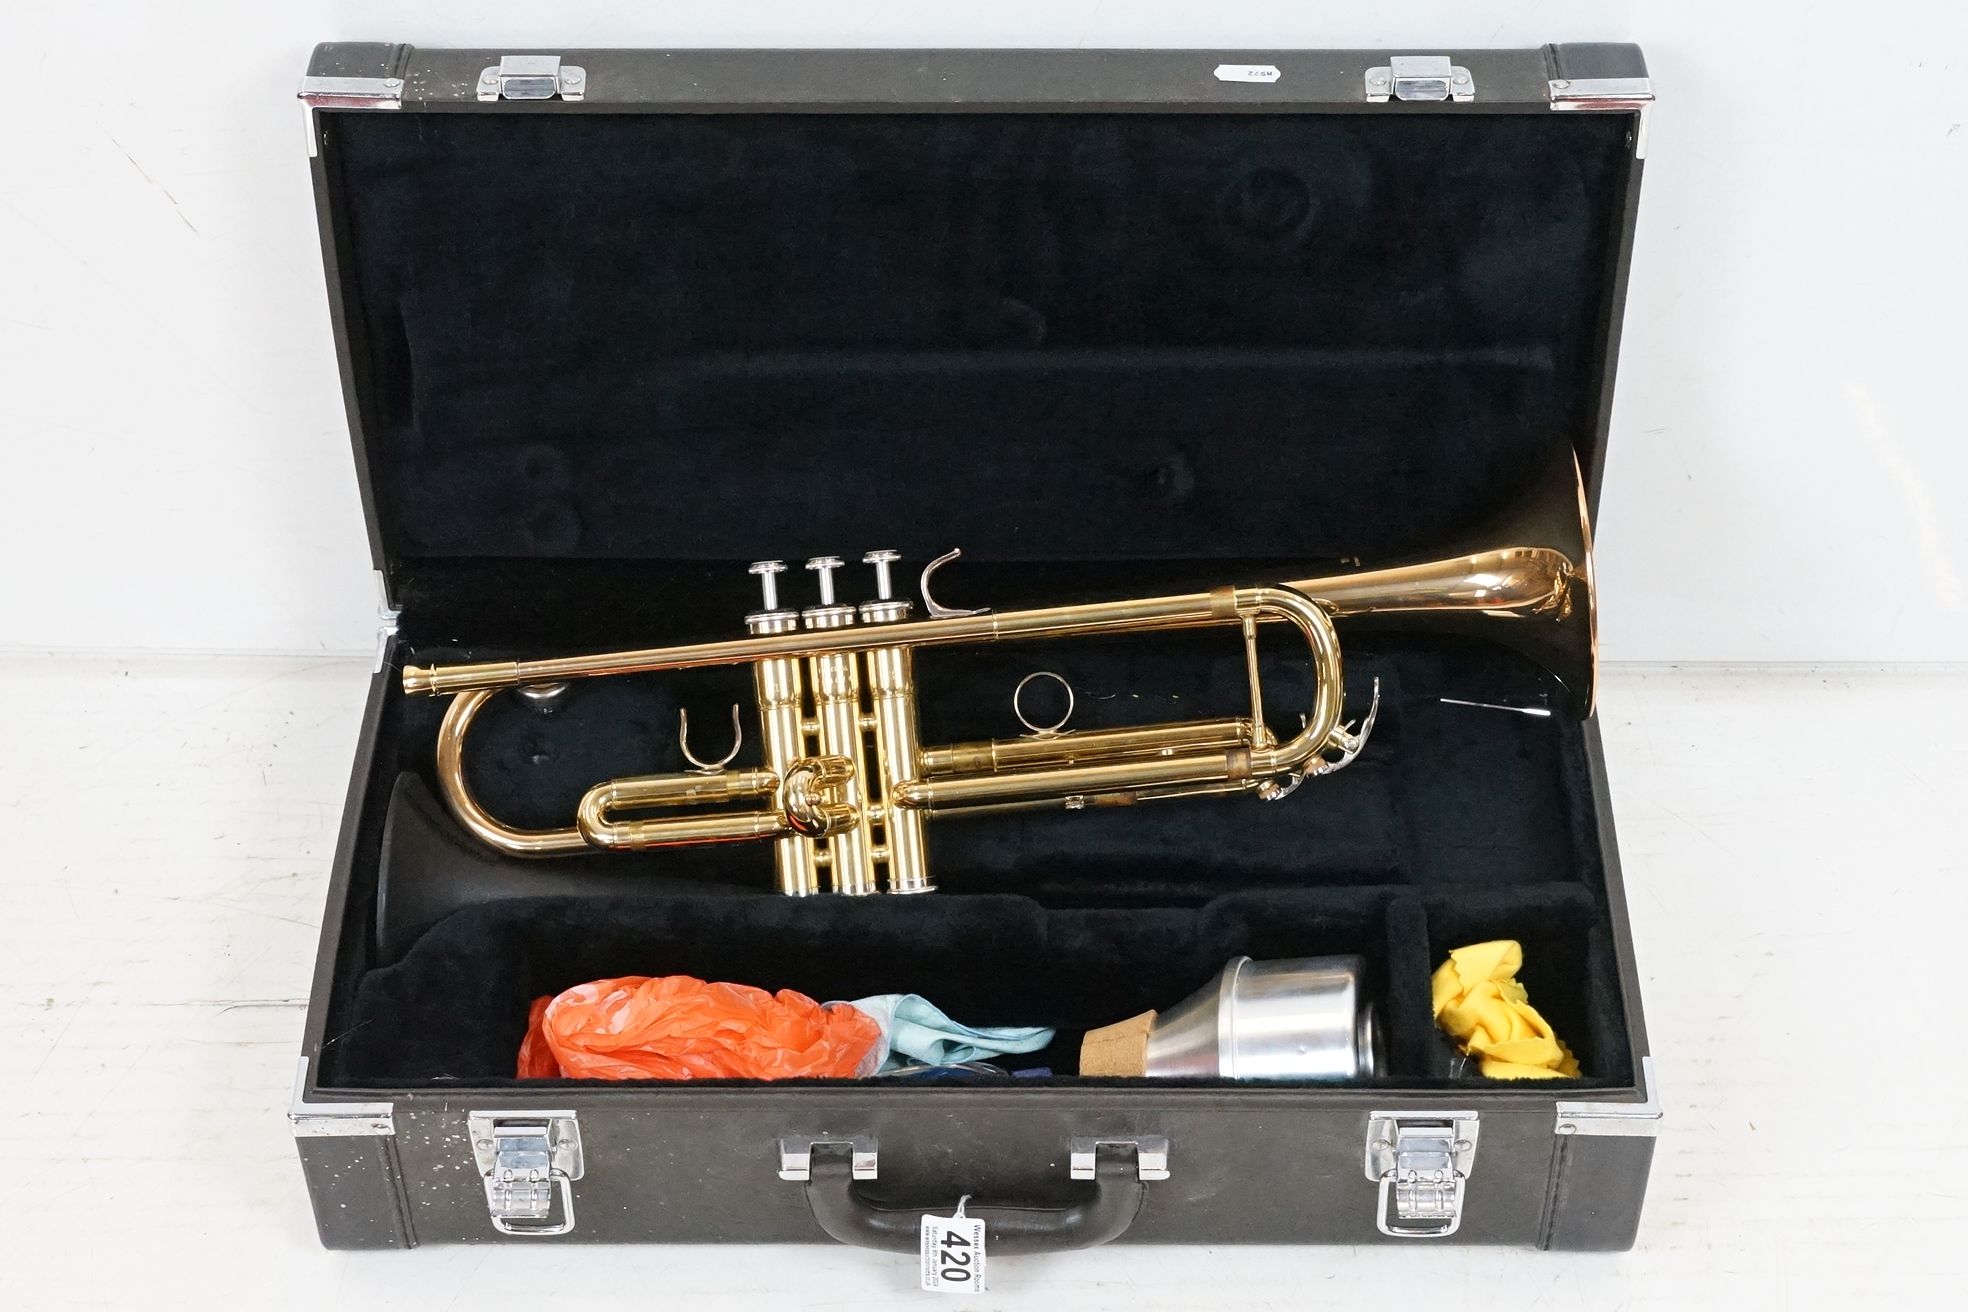 Yamaha YTR 43356 brass trumpet, serial no. 684174, with mouthpiece, in fitted case.